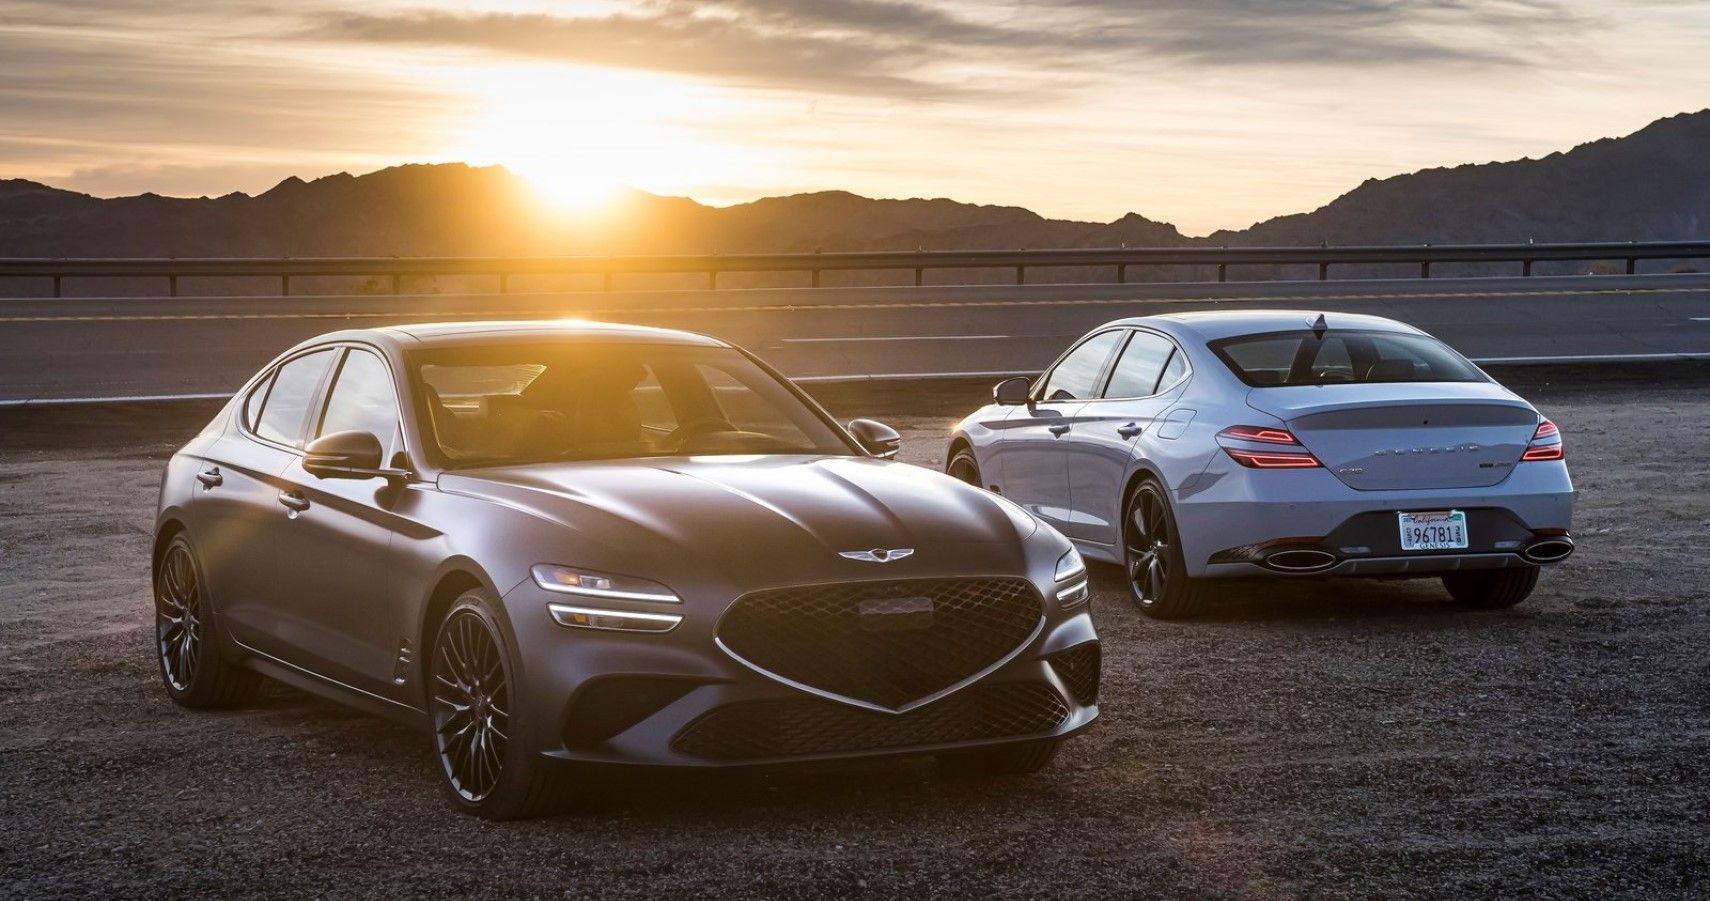 2023 Genesis G70 front and rear view